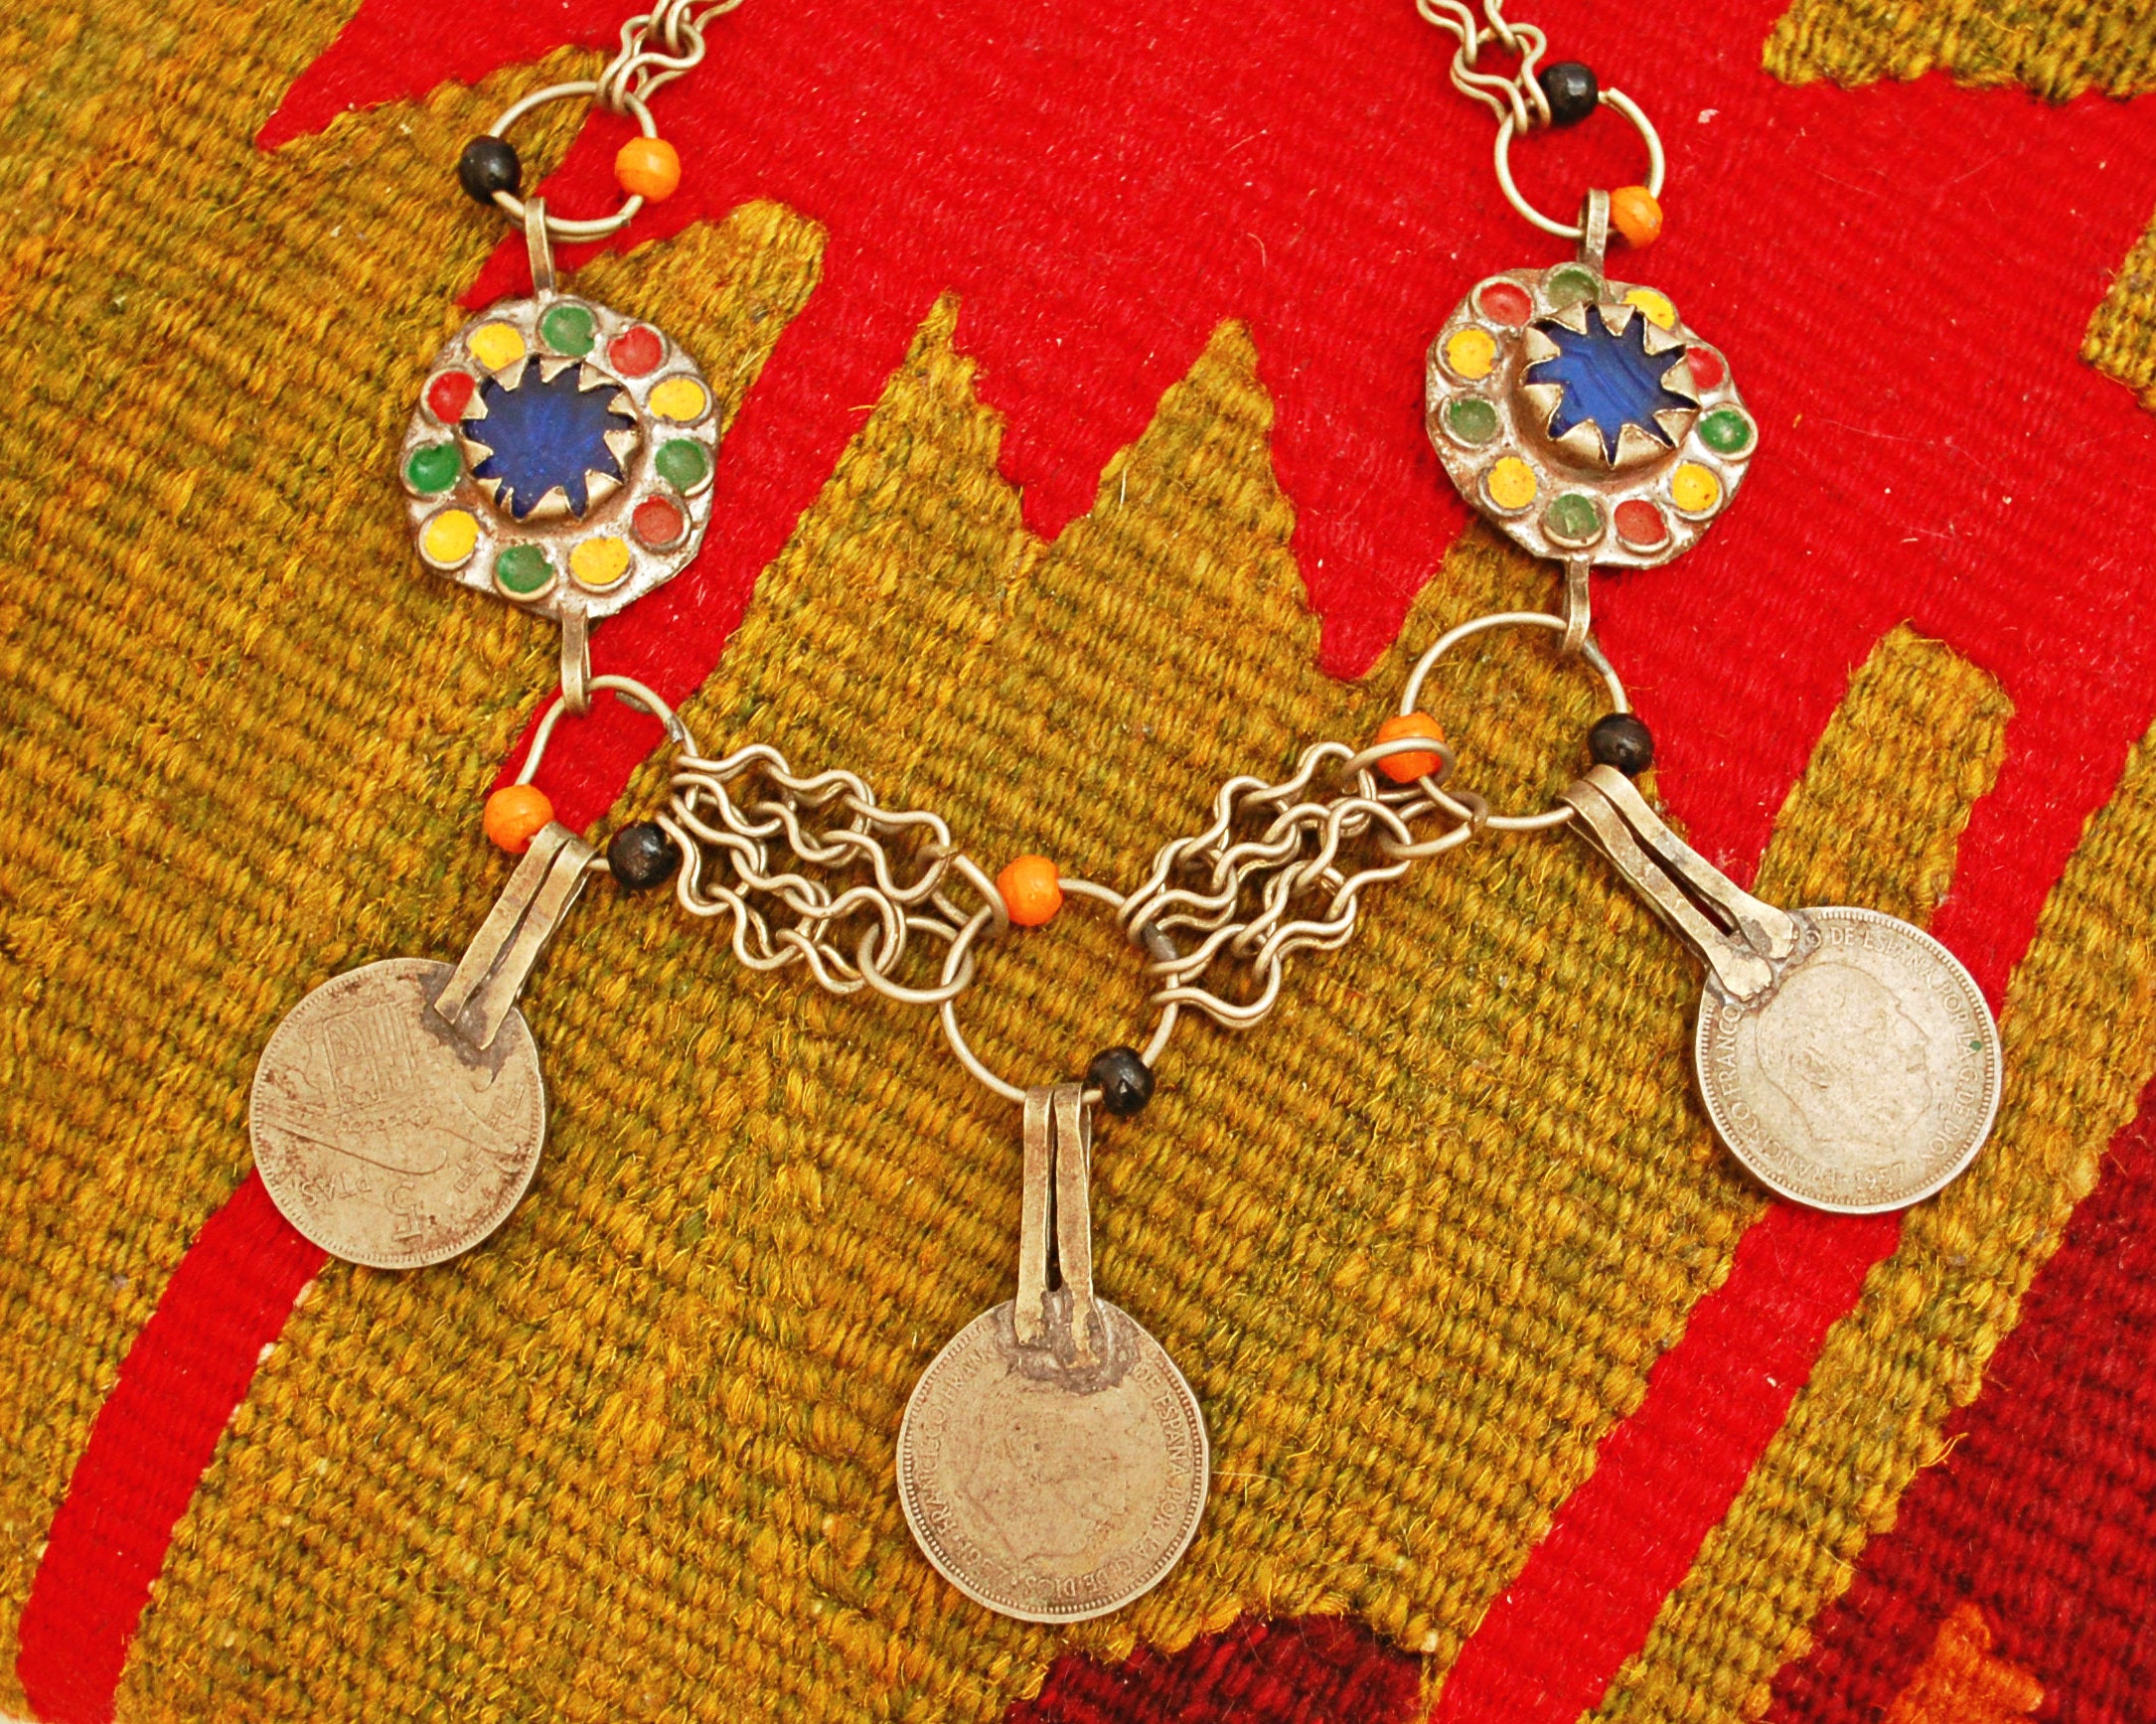 Berber Necklace with Coins